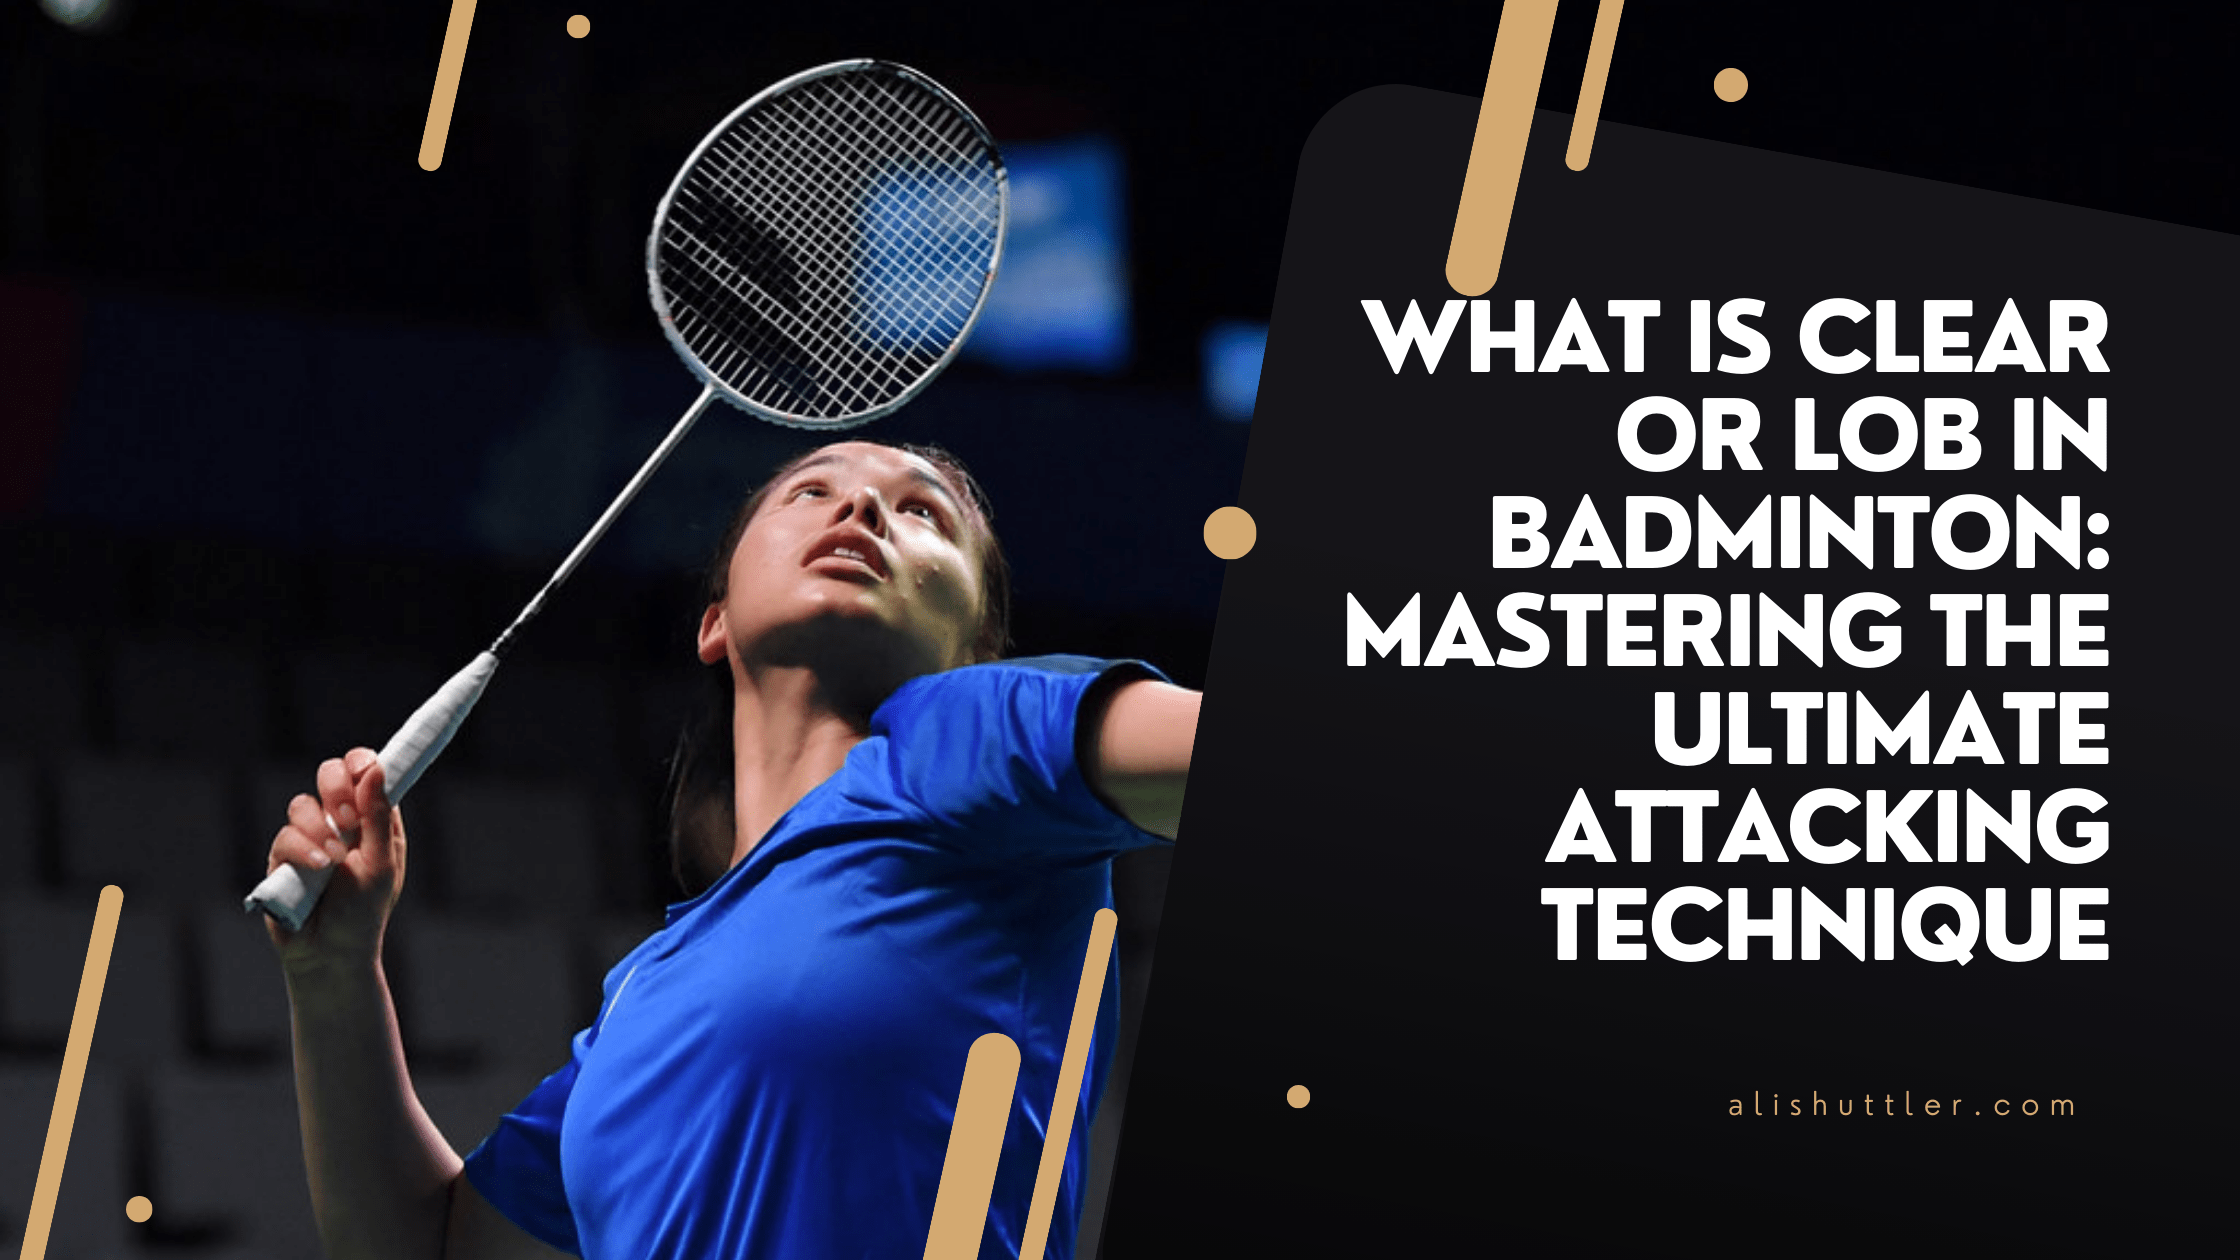 What is Clear or Lob in Badminton: Mastering the Ultimate Attacking Technique